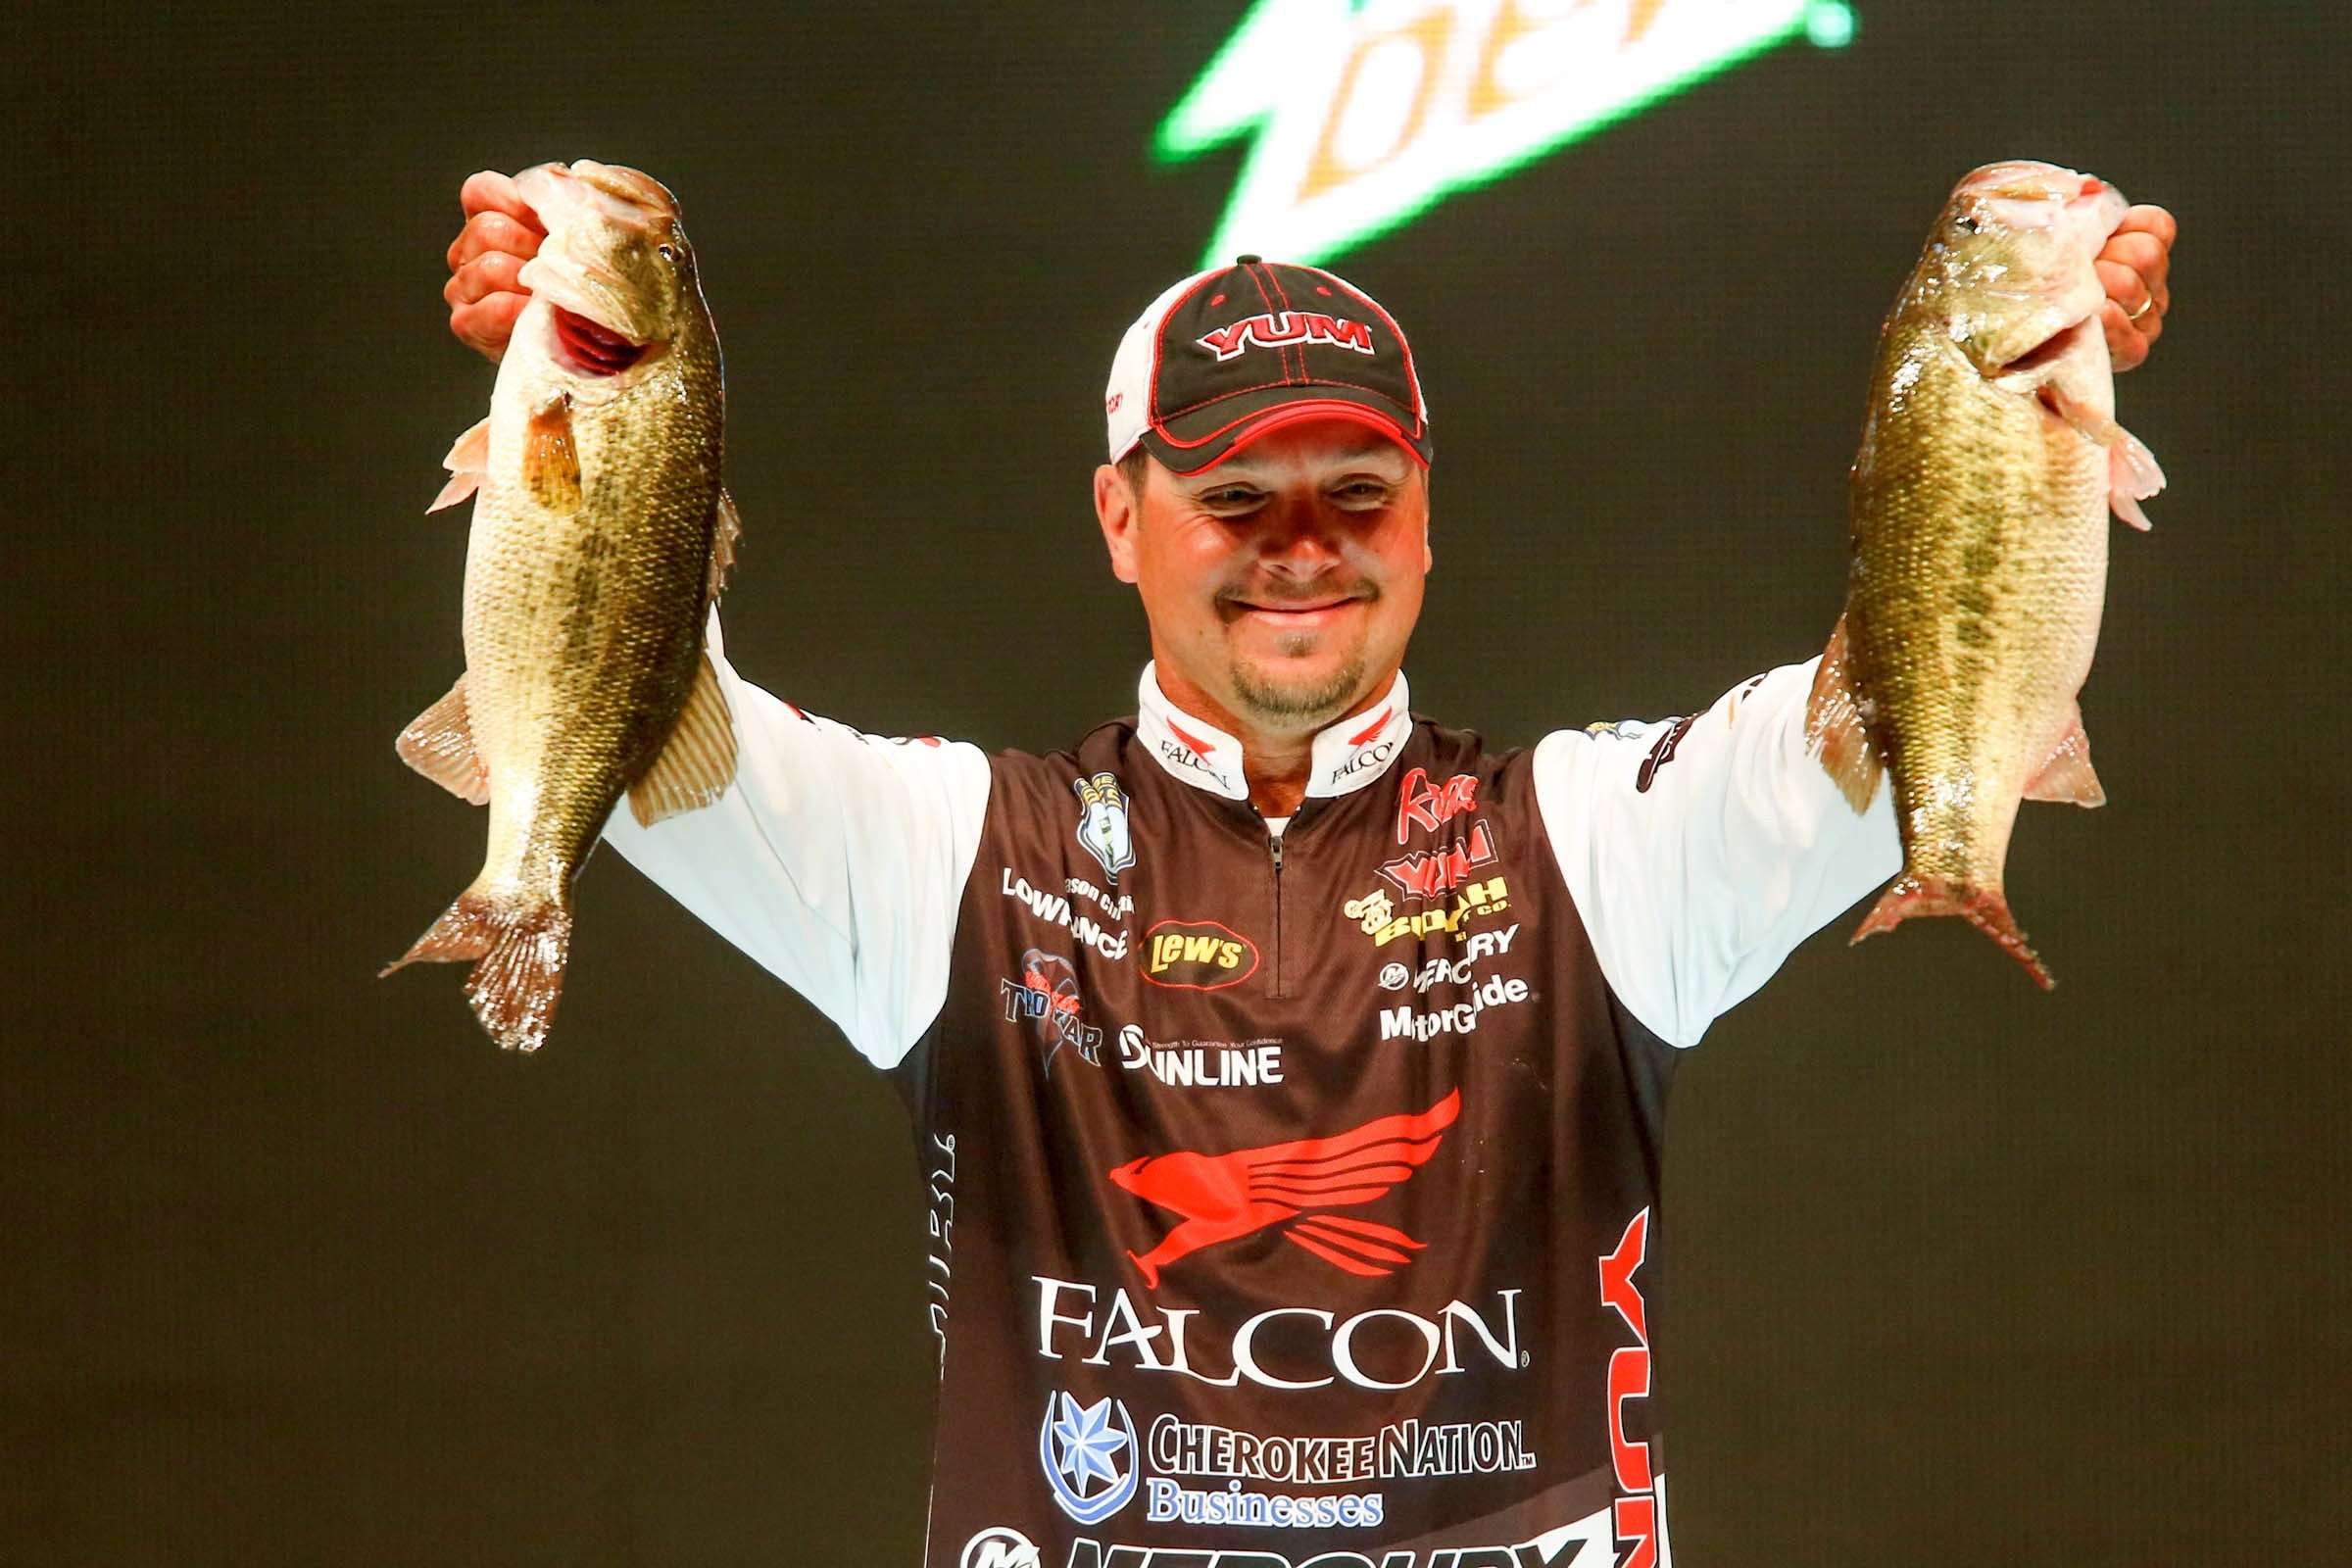 This year Jason Christie will be fishing his third straight Bassmaster Classic, and he's approaching this one differently. Christie finished 18th at Lake Guntersville last year and 7th at Grand Lake in 2013. Unlike those two, Christie spent no time pre-fishing Lake Hartwell before the Jan. 1 cutoff date.